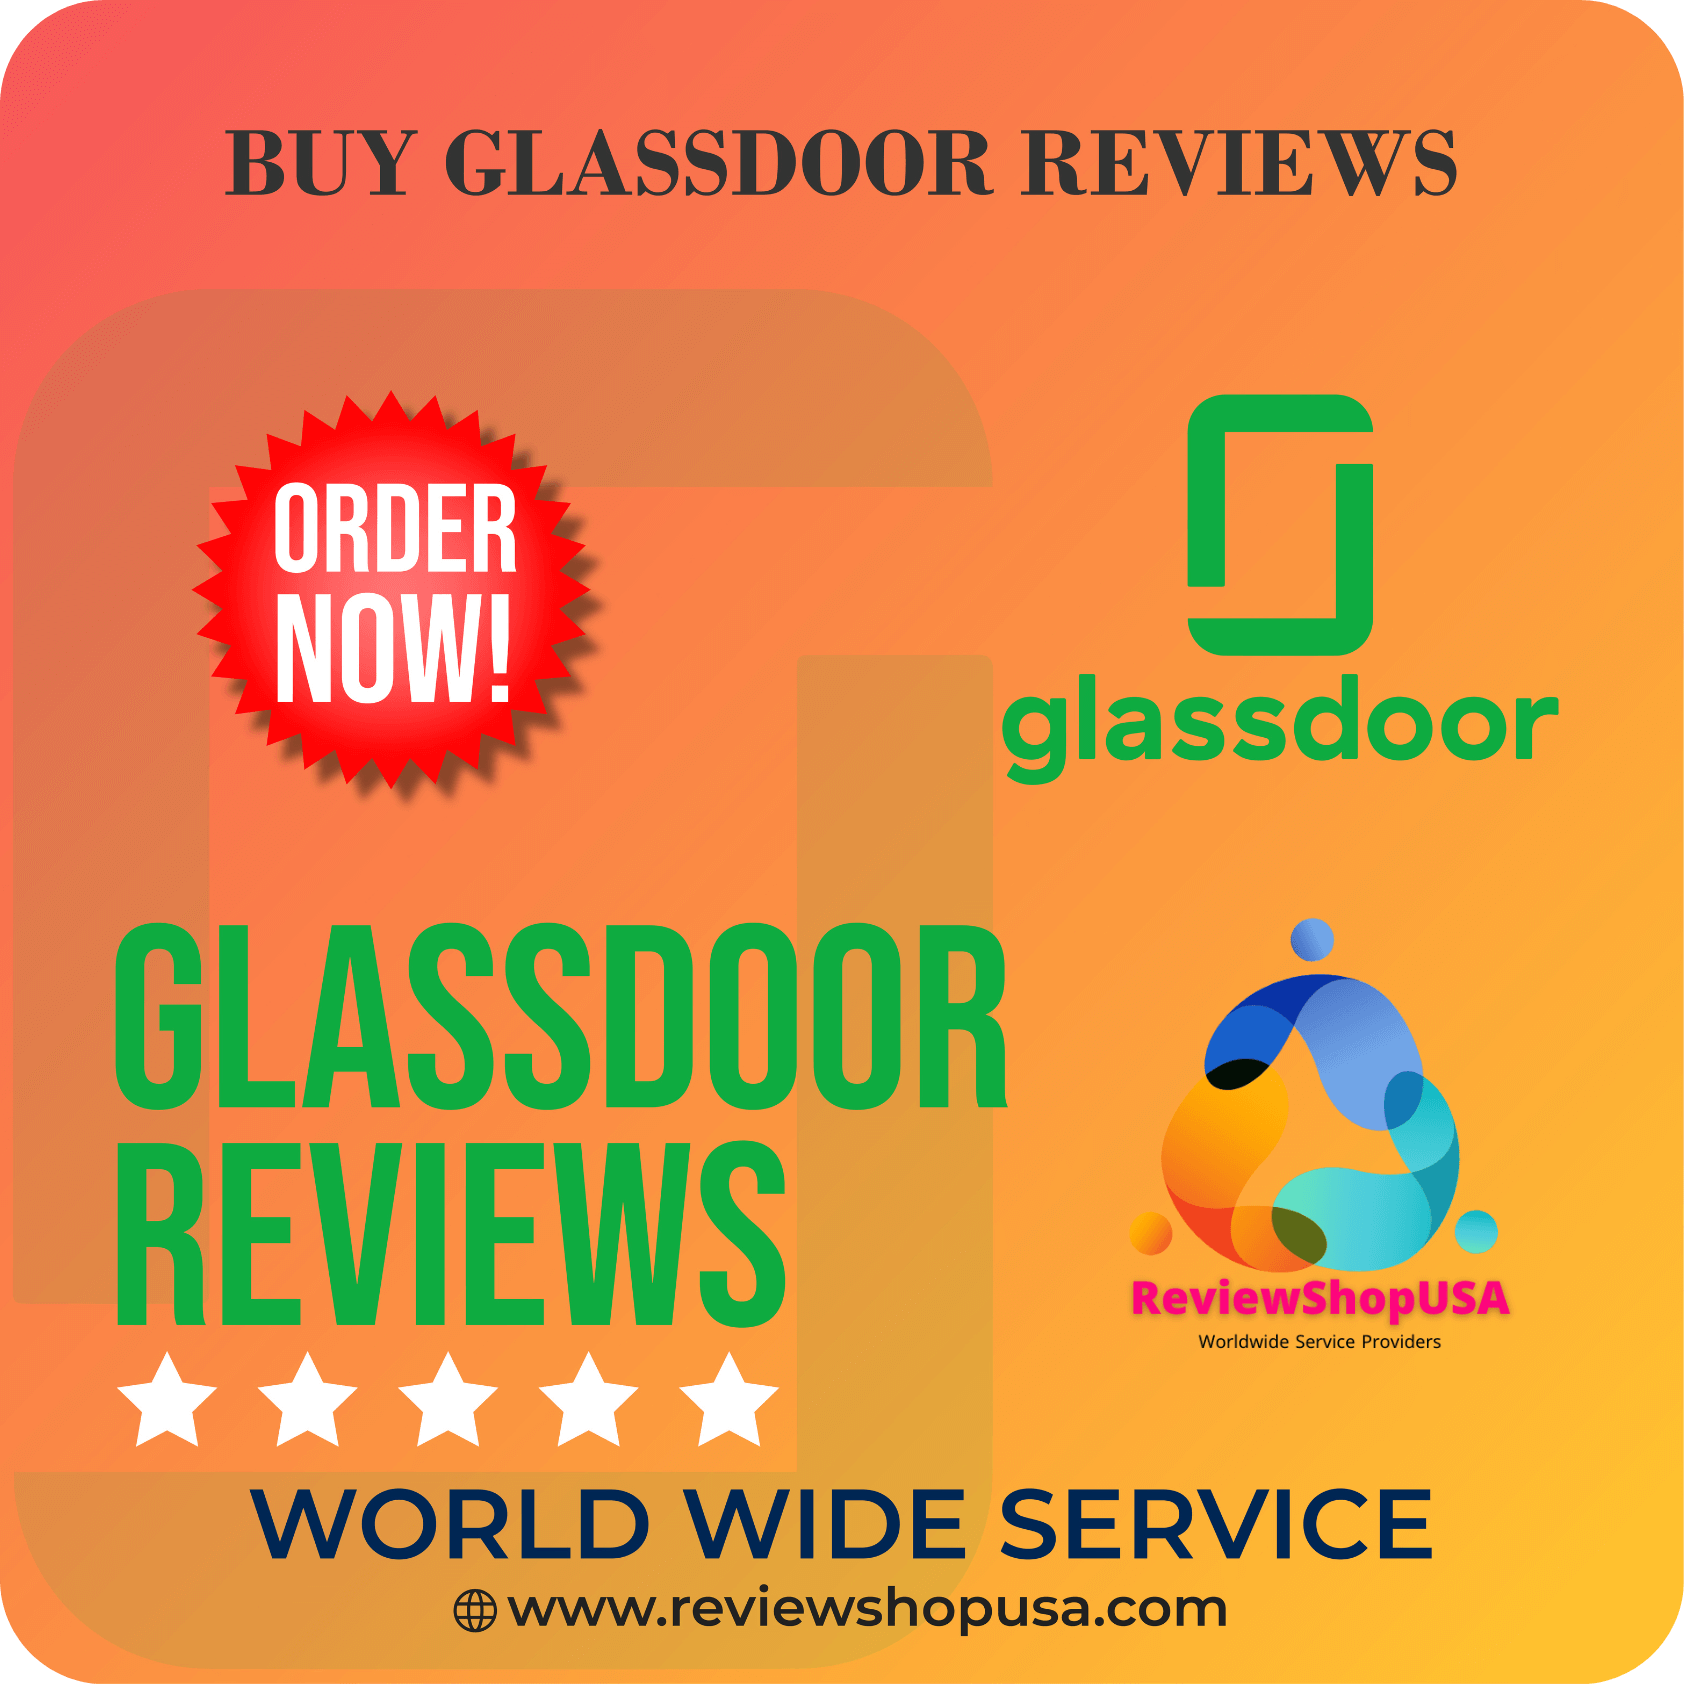 Buy Glassdoor Reviews - Buy 5 Star Reviews for Your Business...